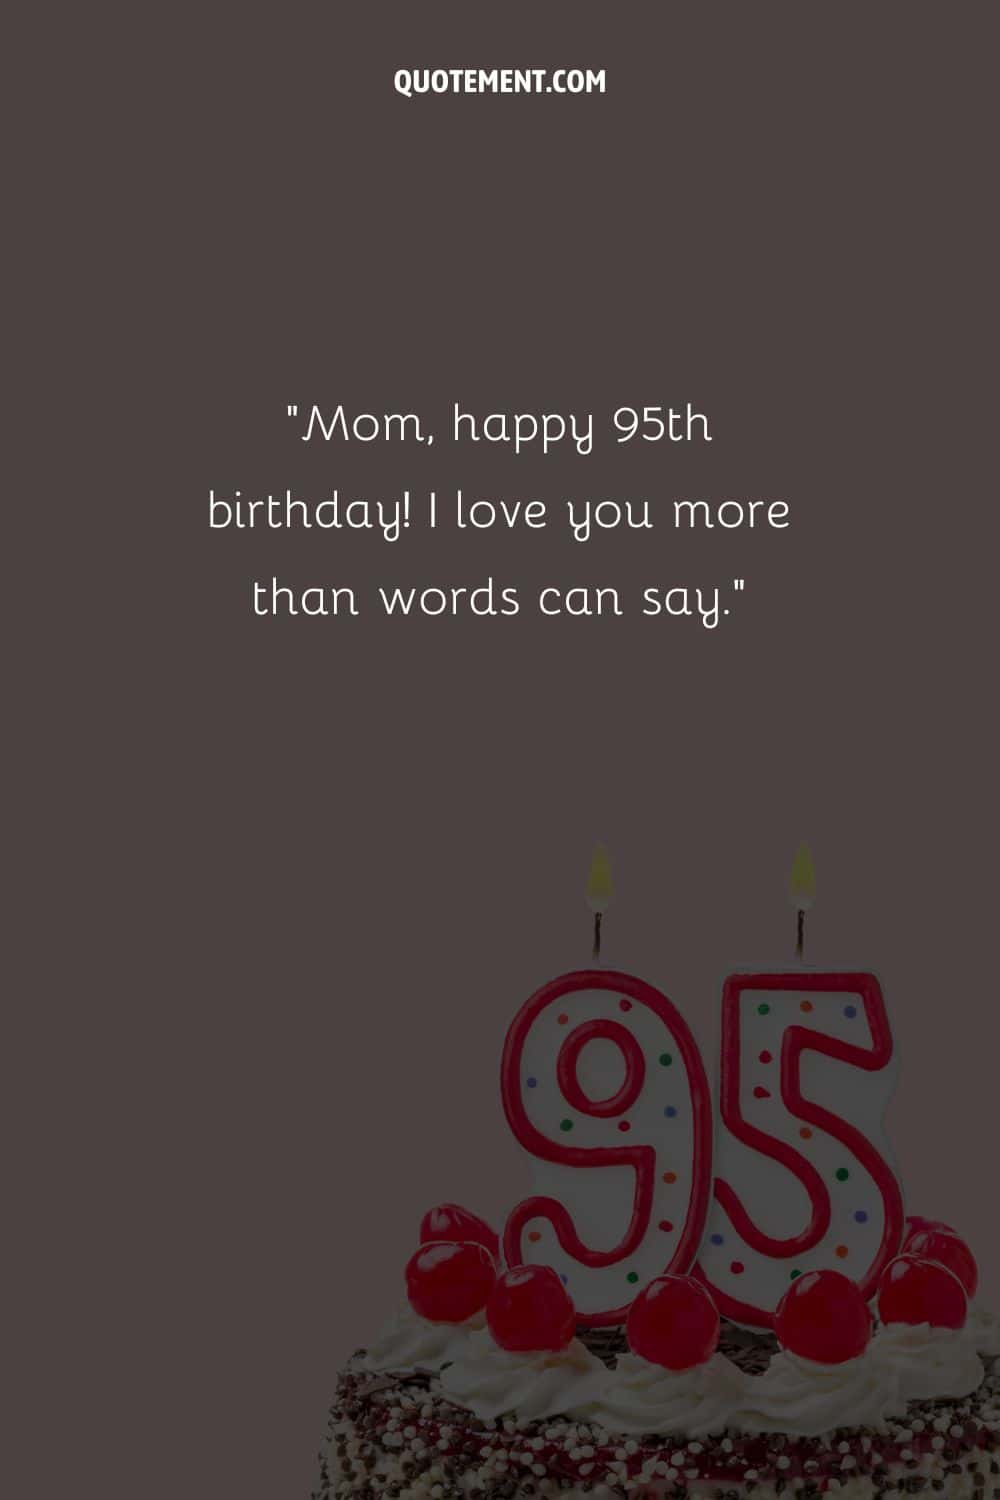 “Mom, happy 95th birthday! I love you more than words can say.”